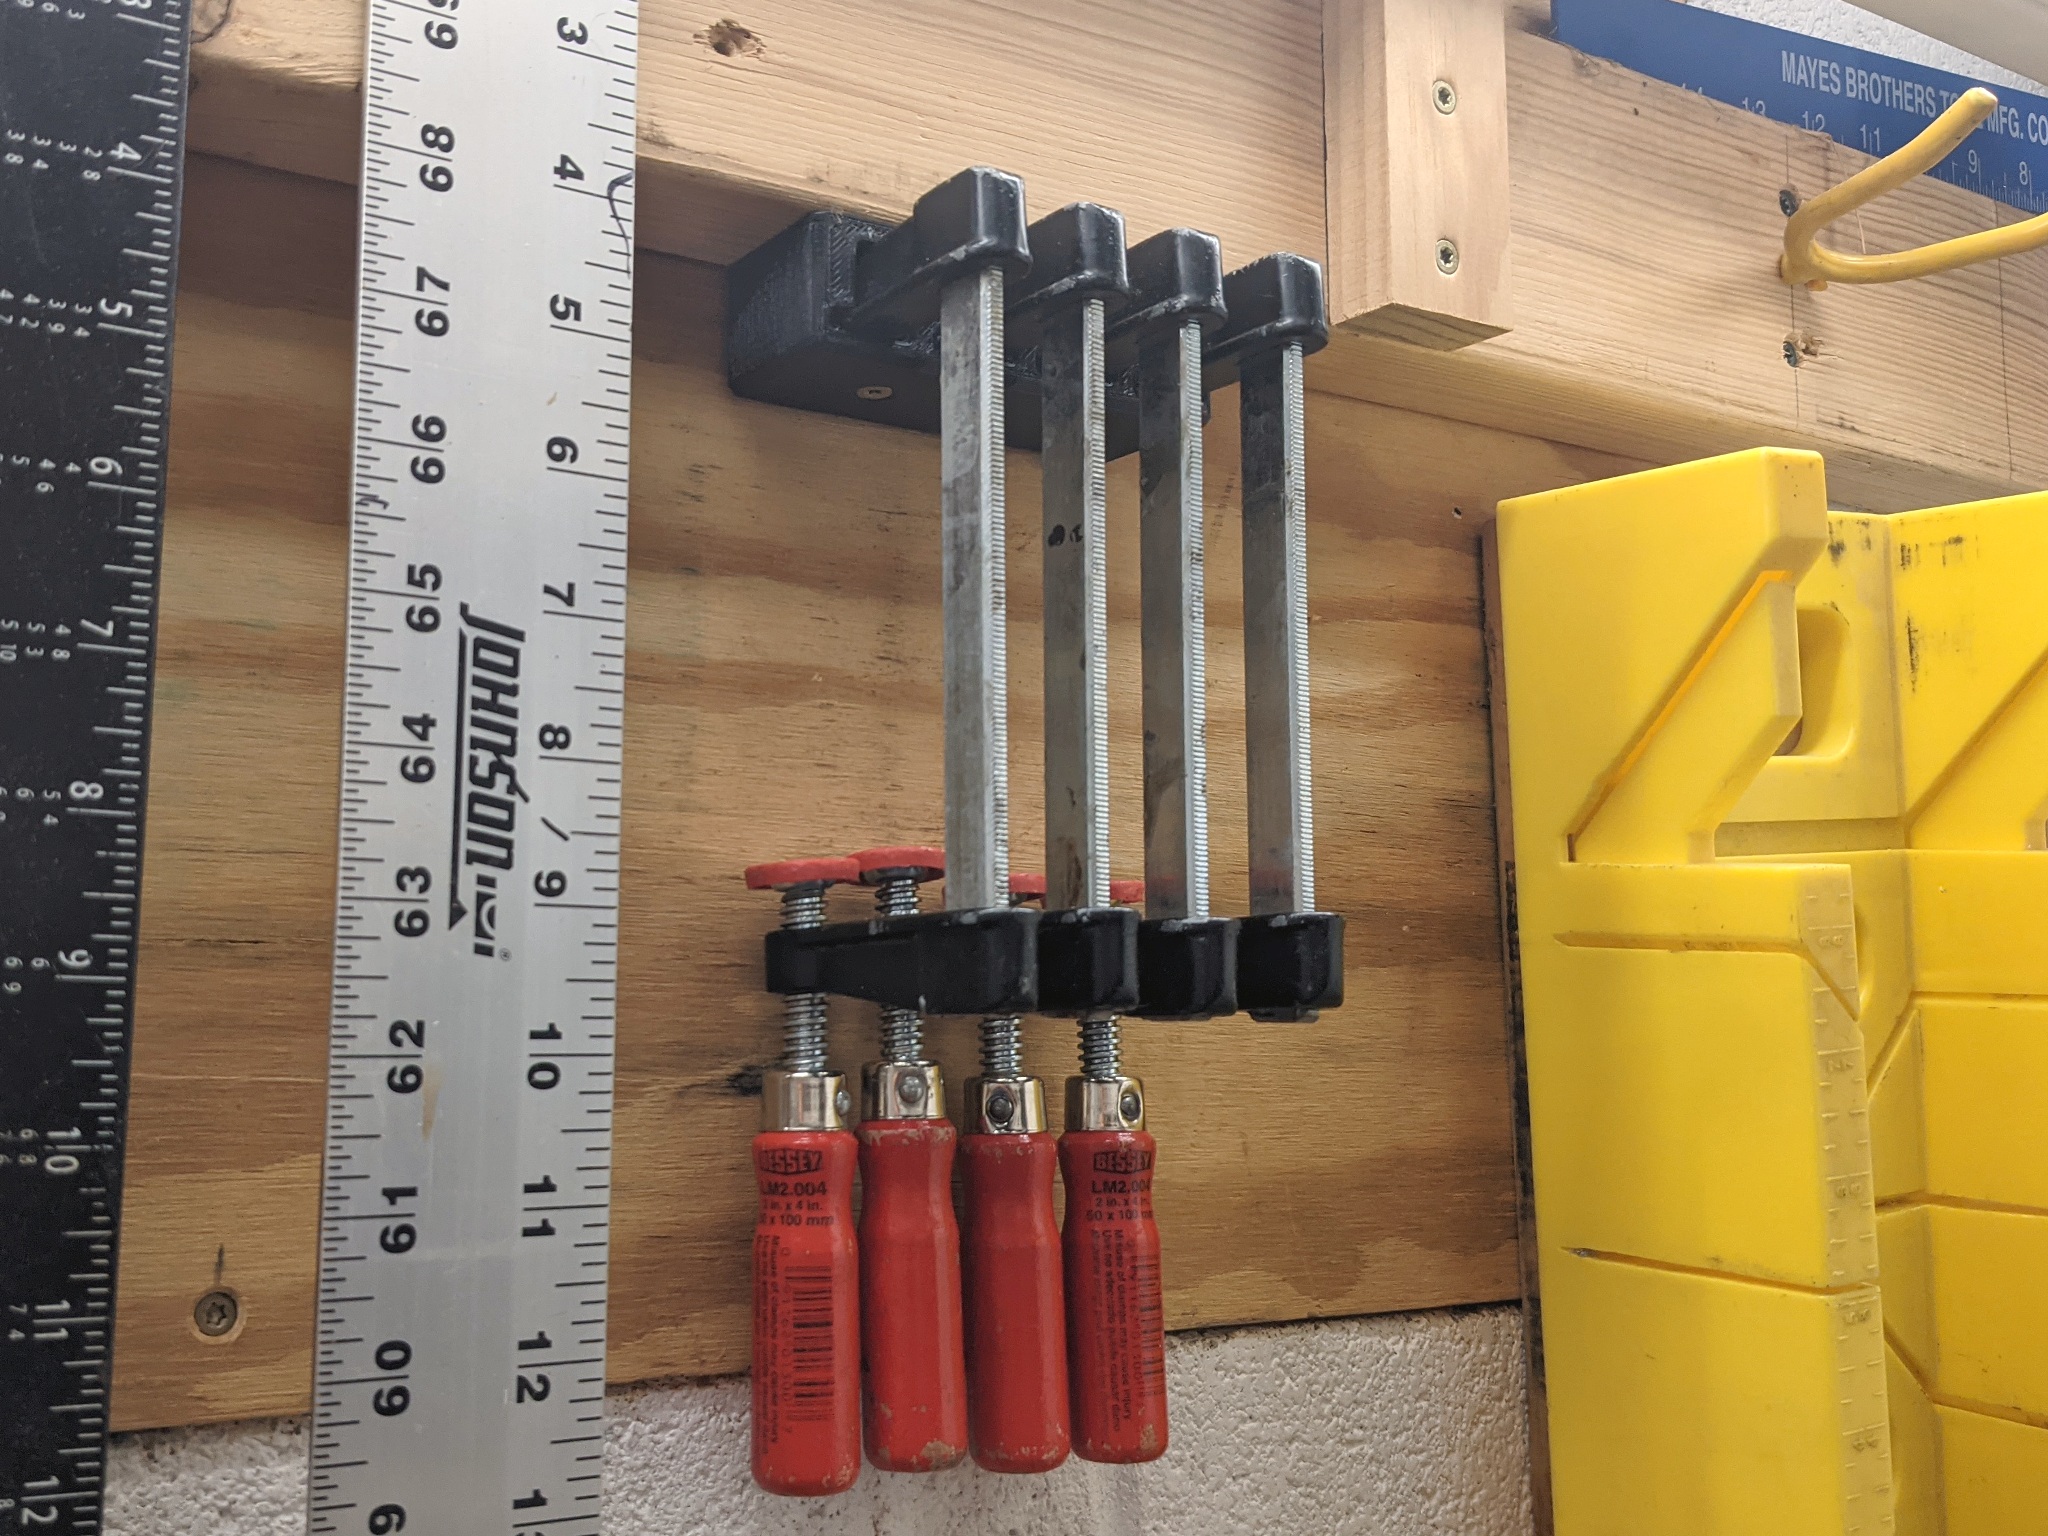 5 Gallon Bucket Handle Grip - Metric and SAE Versions by MSB